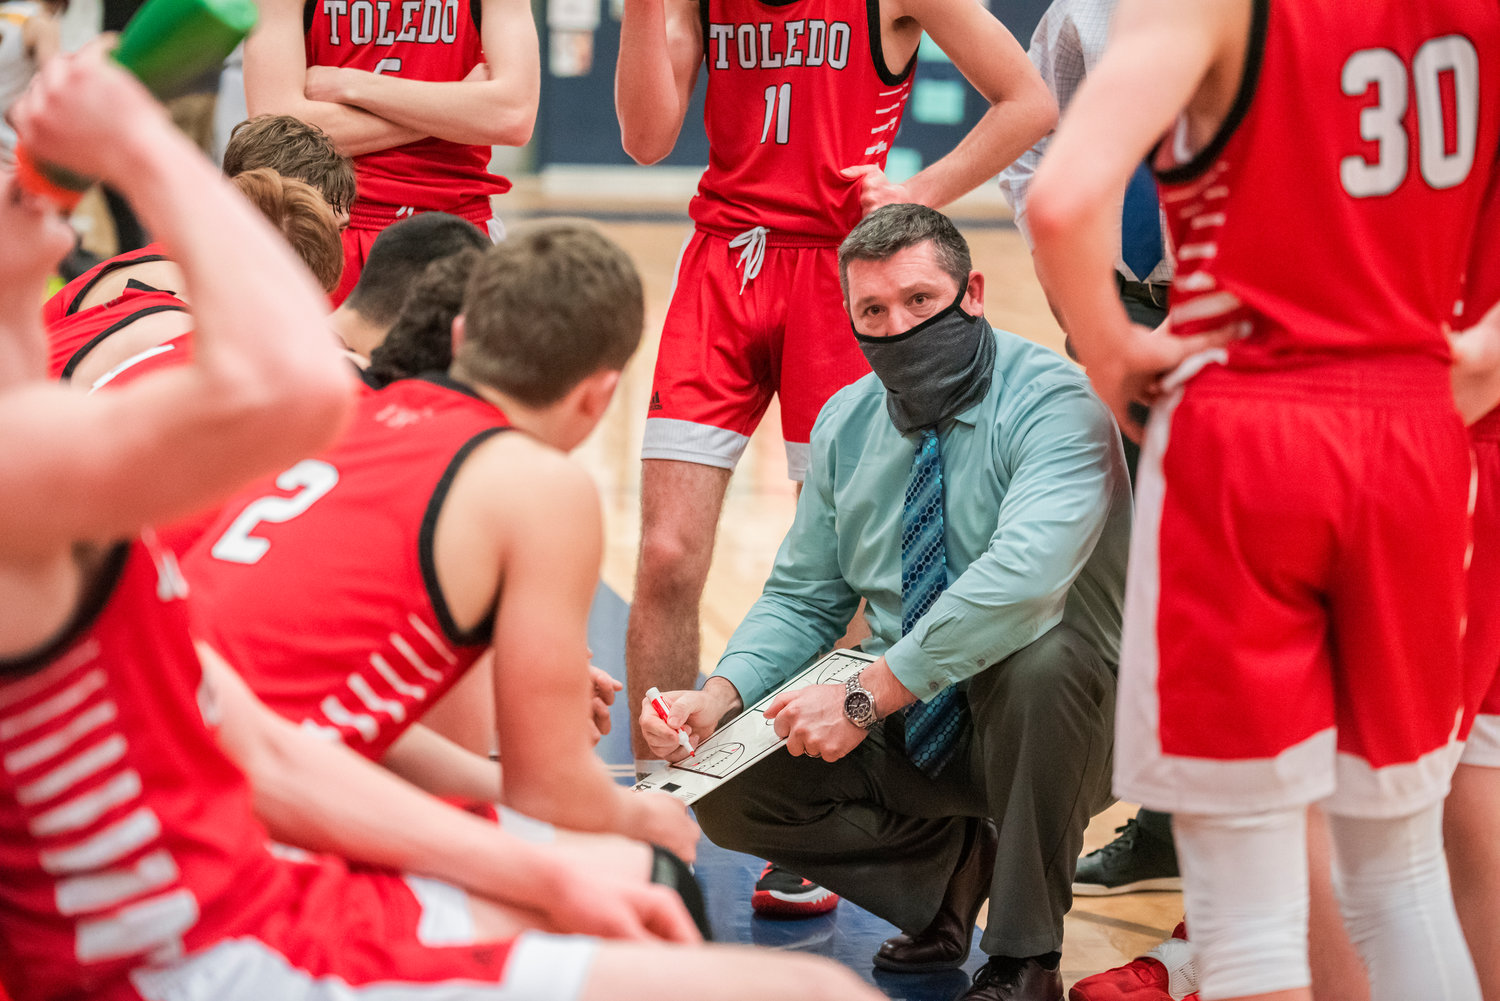 Toledo Head Coach Grady Fallon talks to players during a game Wednesday night.